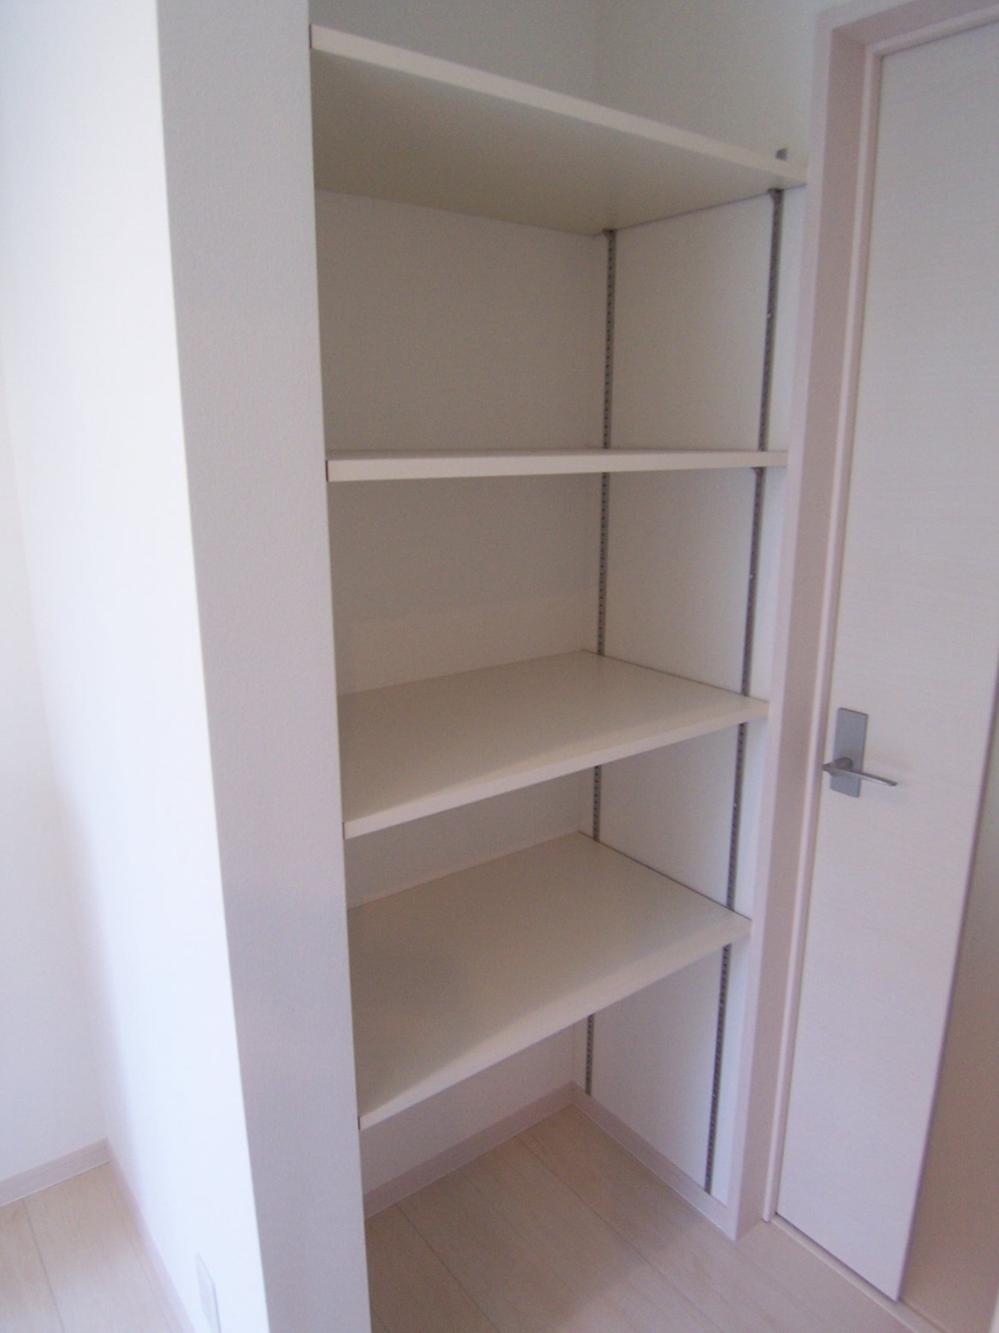 Same specifications photos (Other introspection). Seller example of construction (pantry)